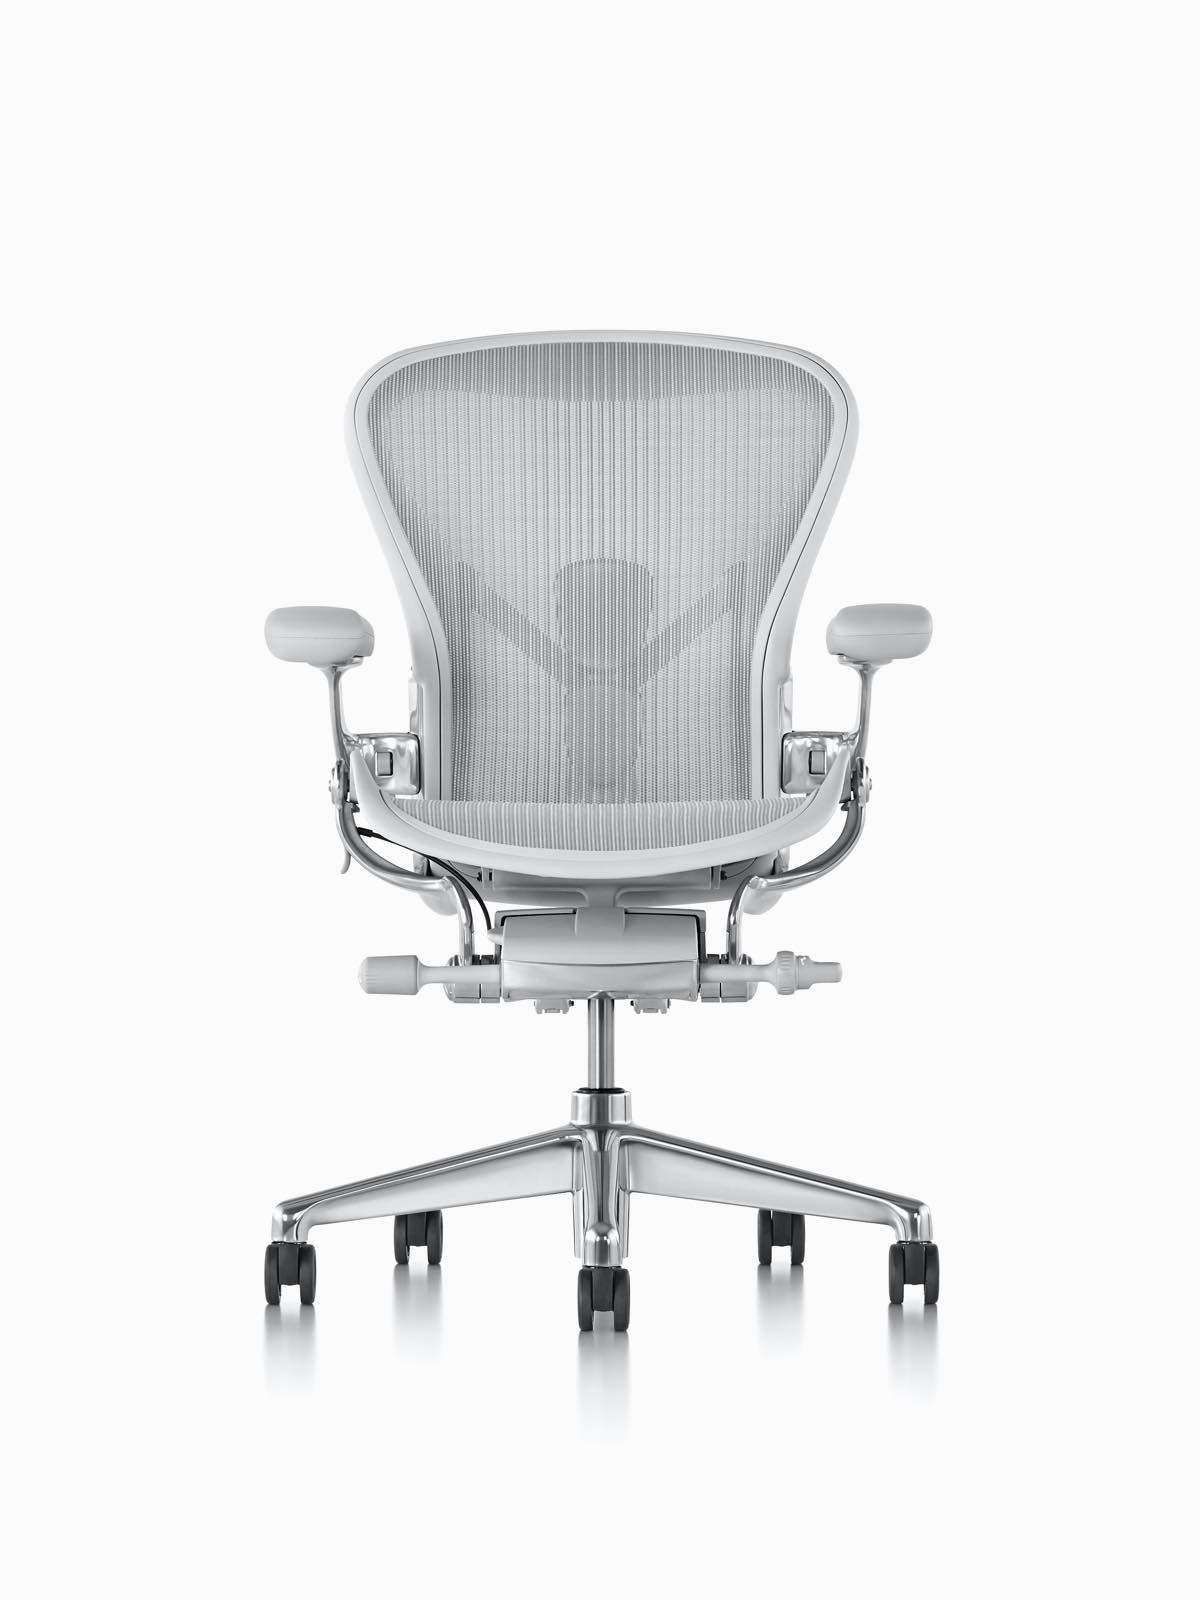 Light grey Aeron office chair, viewed from the front. Select to go to the Aeron Chairs product page.